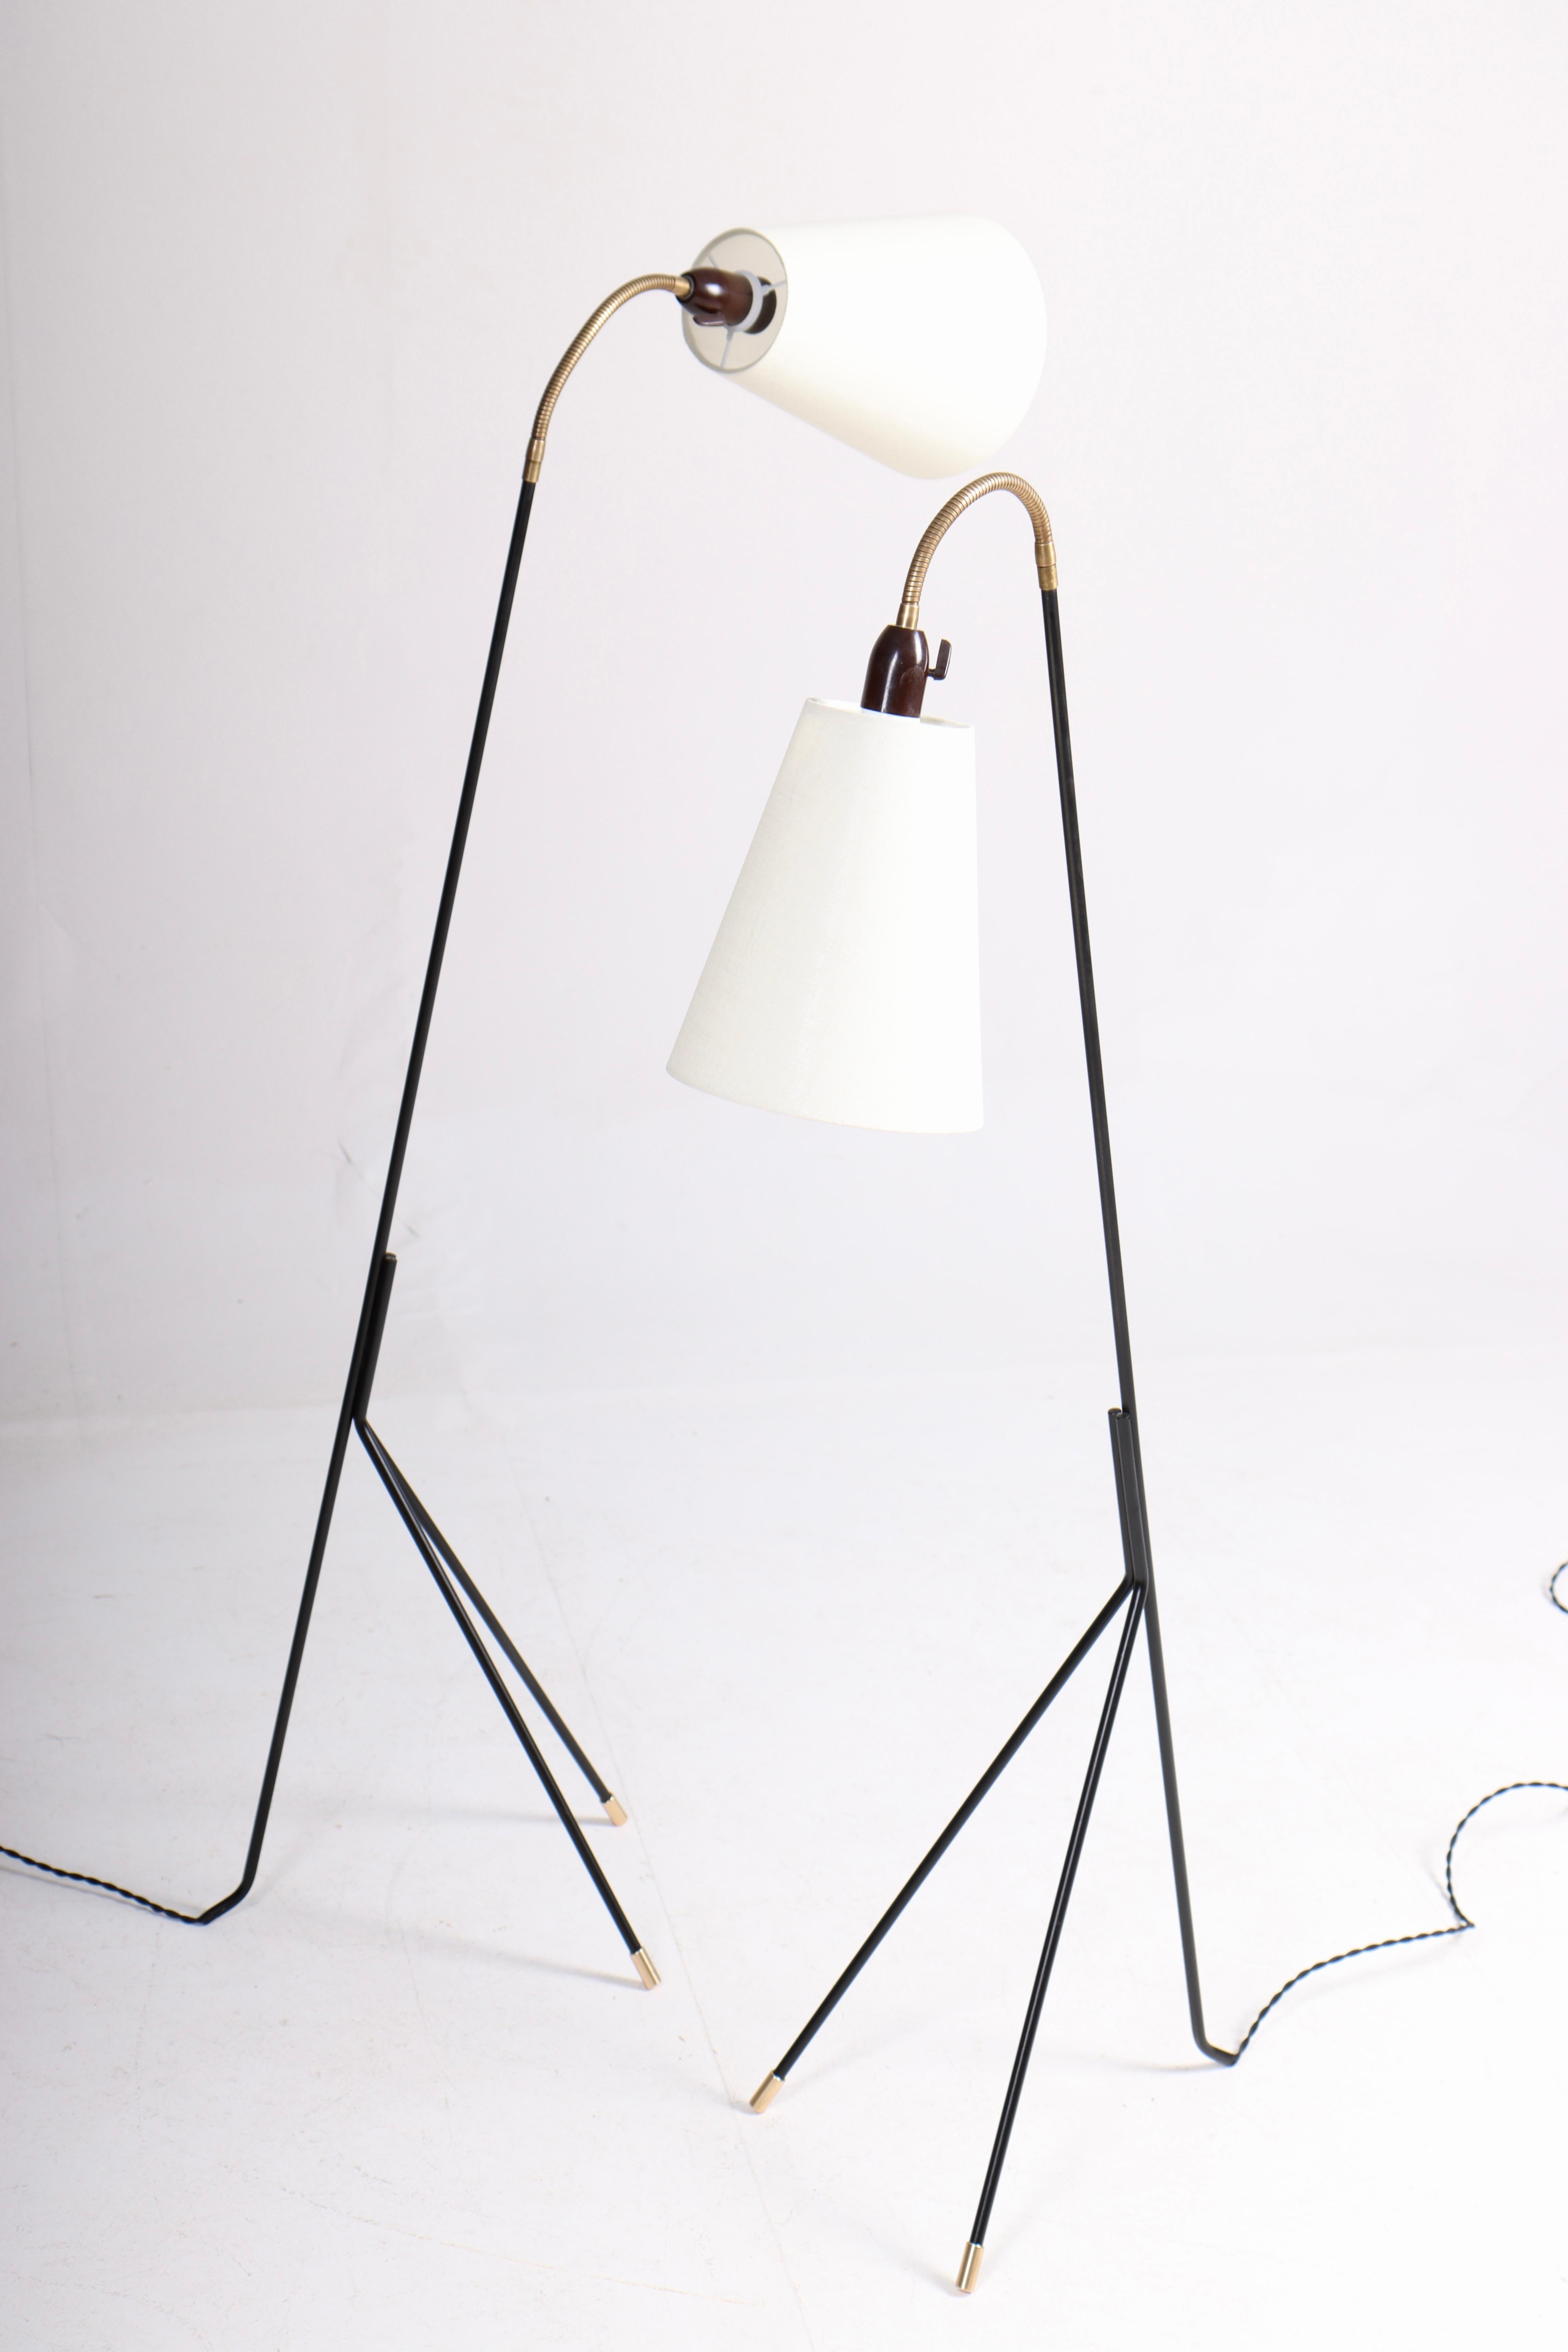 Pair of Midcentury Floor Lamps by Holm Sørensen, Made in Denmark, 1950s For Sale